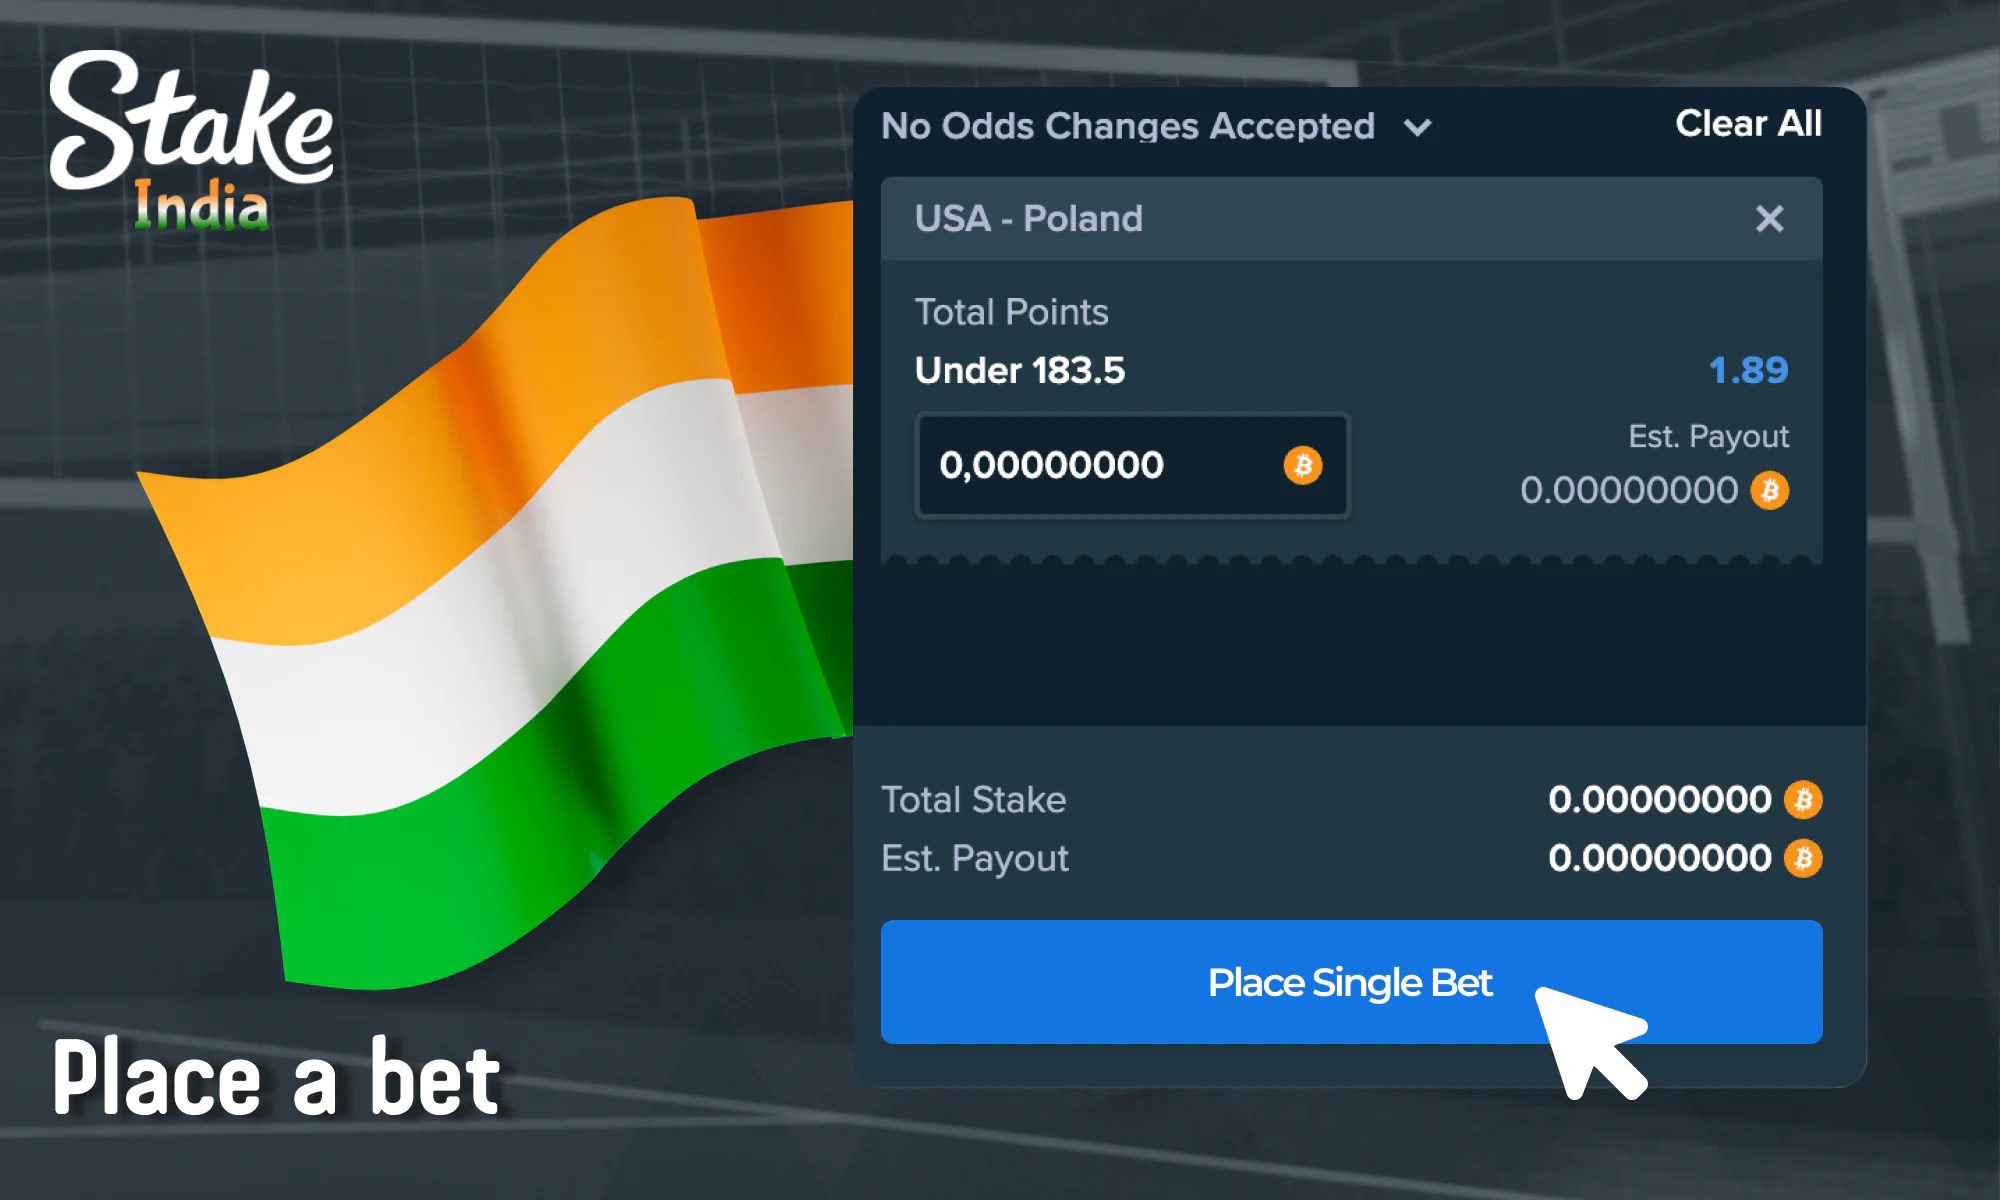 Place a bet on a volleyball match - Stake India